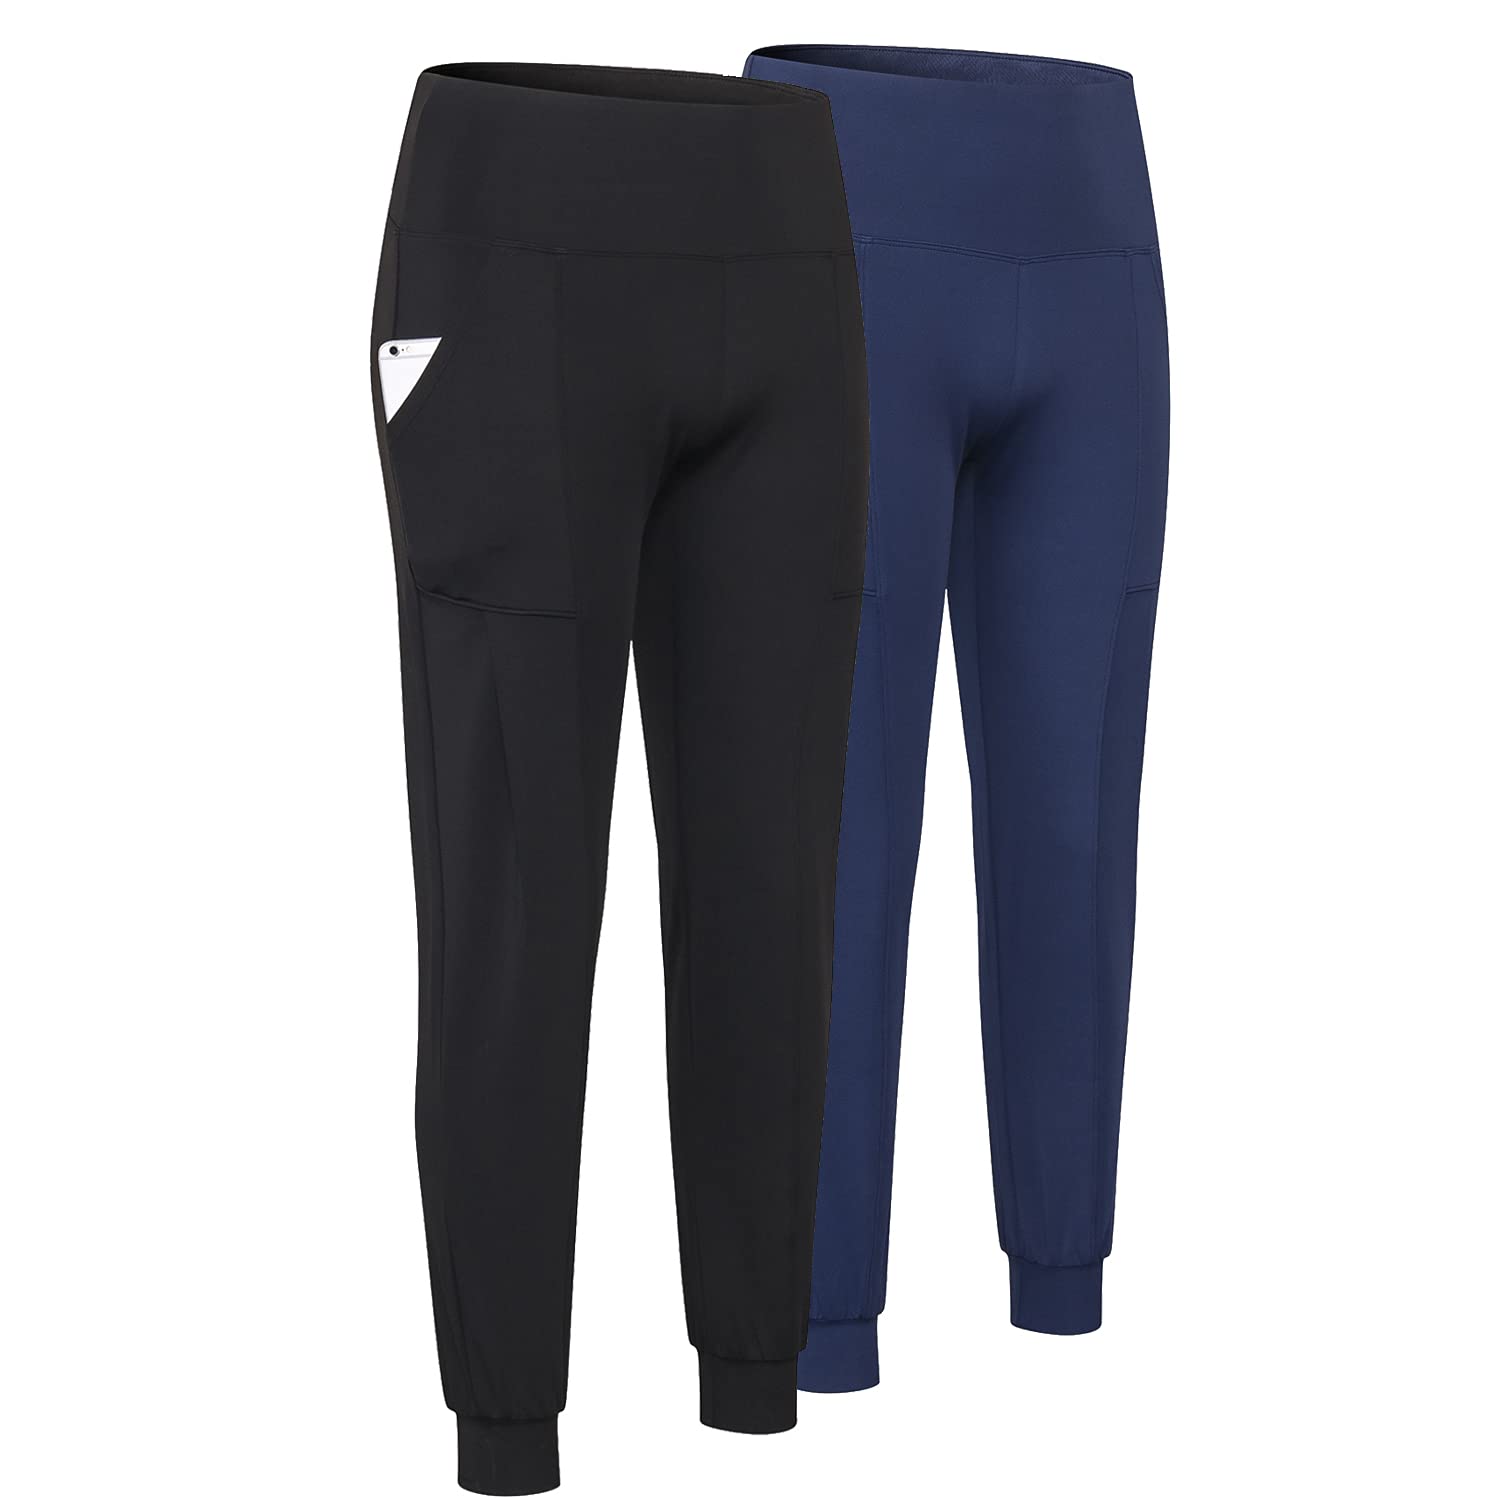 2 Pack Women's Sweatpants, High Waisted Soft Jogger Pants Athletic Cinch  Bottom Lounge Sweat Pants with Pockets